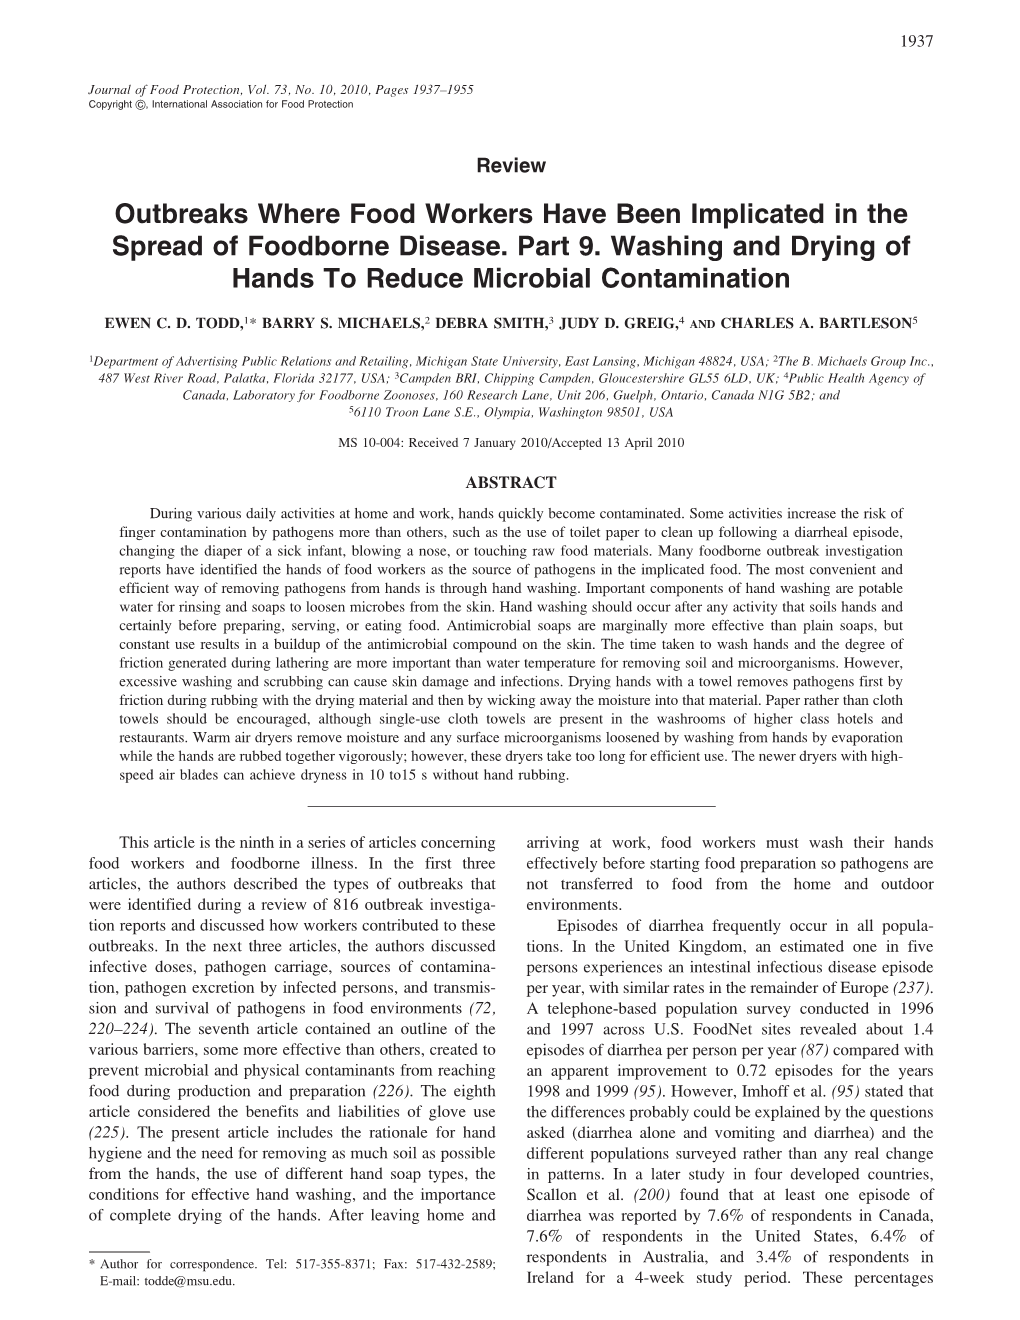 Outbreaks Where Food Workers Have Been Implicated in the Spread of Foodborne Disease. Part 9. Washing and Drying of Hands to Reduce Microbial Contamination